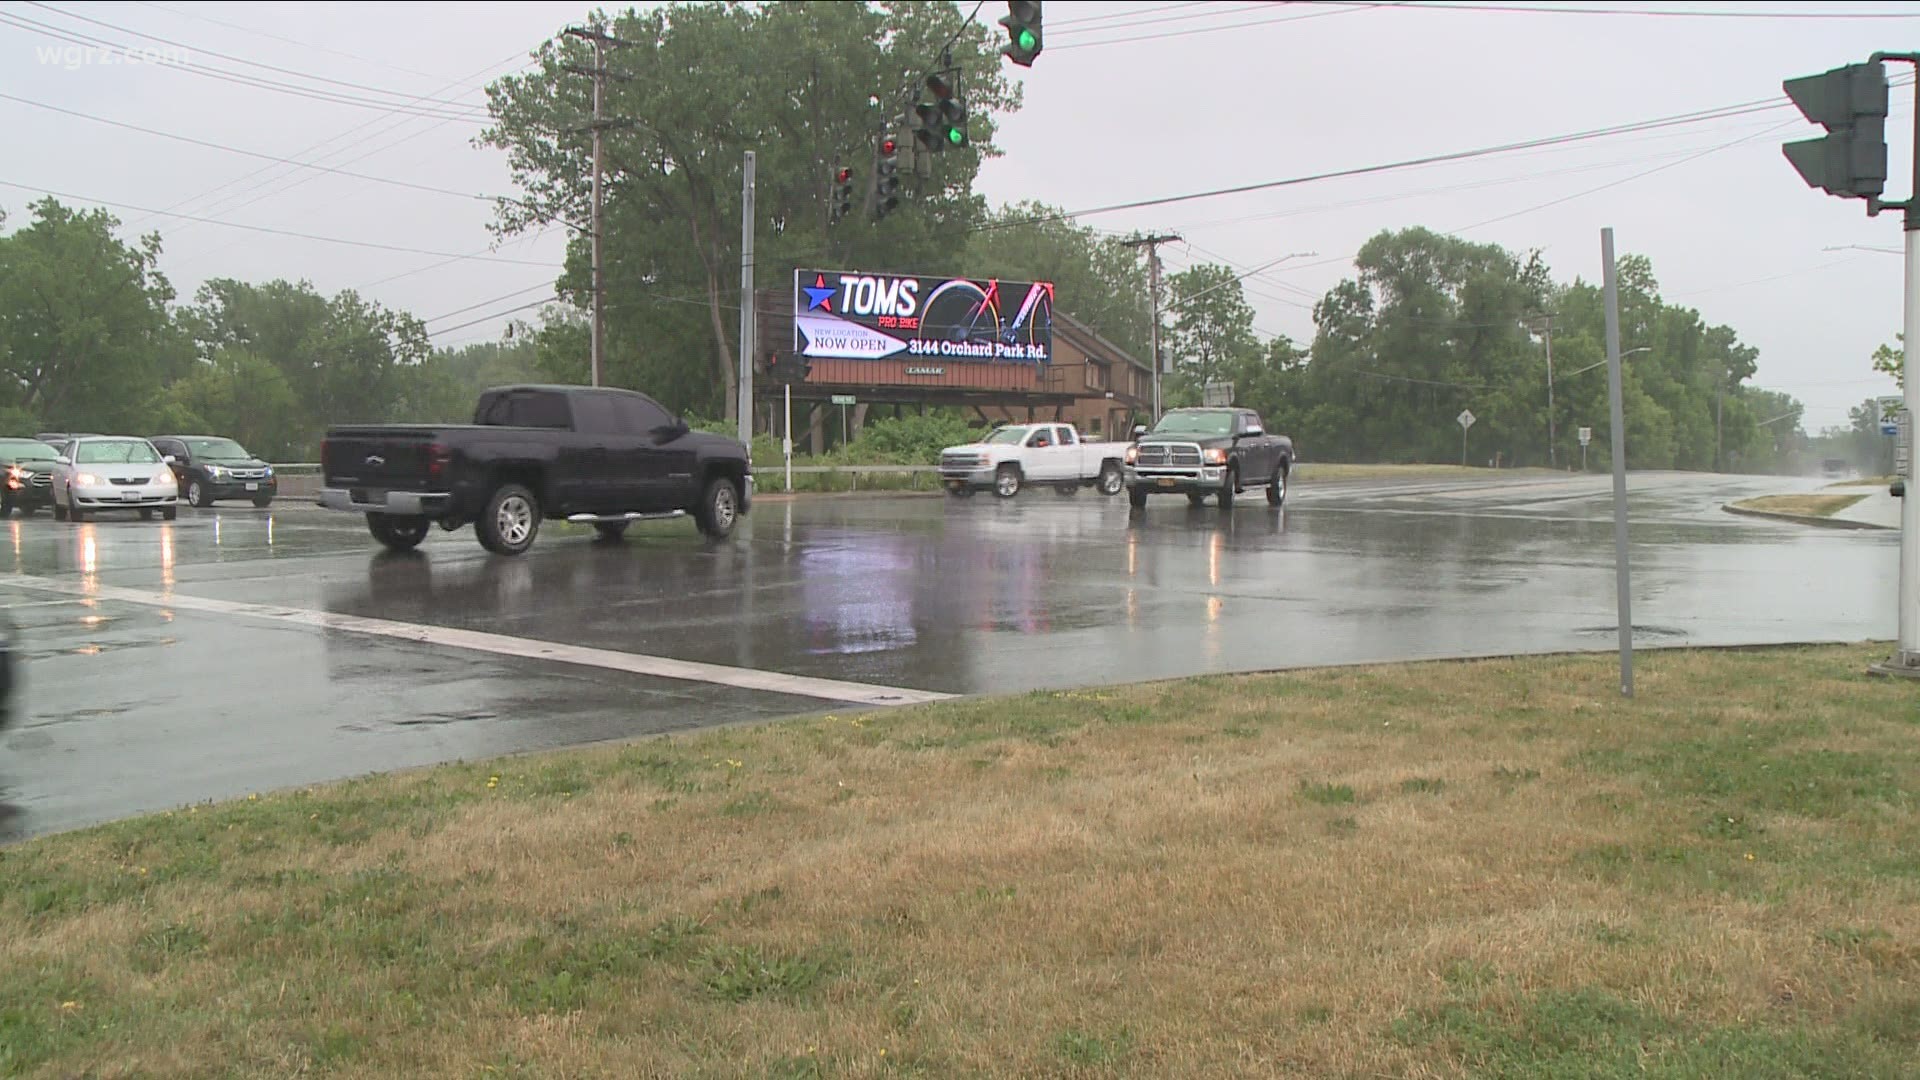 West Seneca Police are asking families to talk about this with older drivers about driving responsibility and their safety to themselves and others around them.